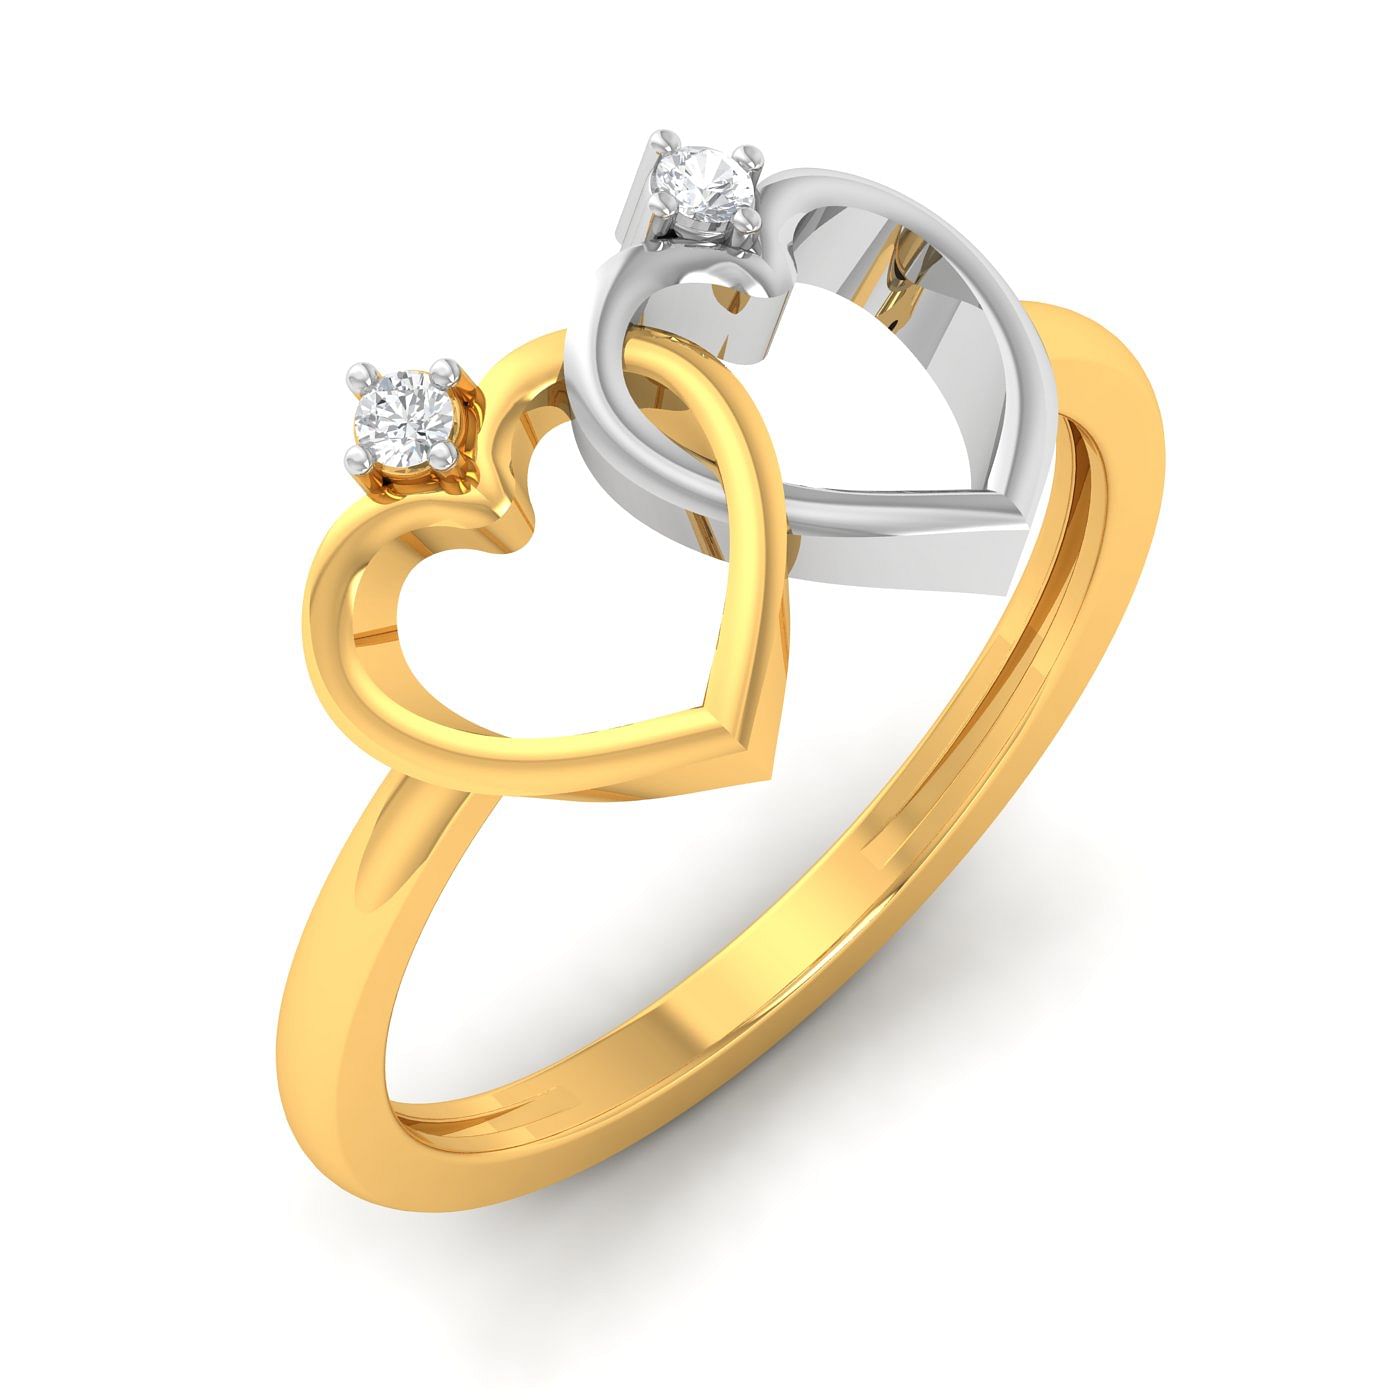 Double Heart Yellow Gold Swati Diamond Ring For Gift Her